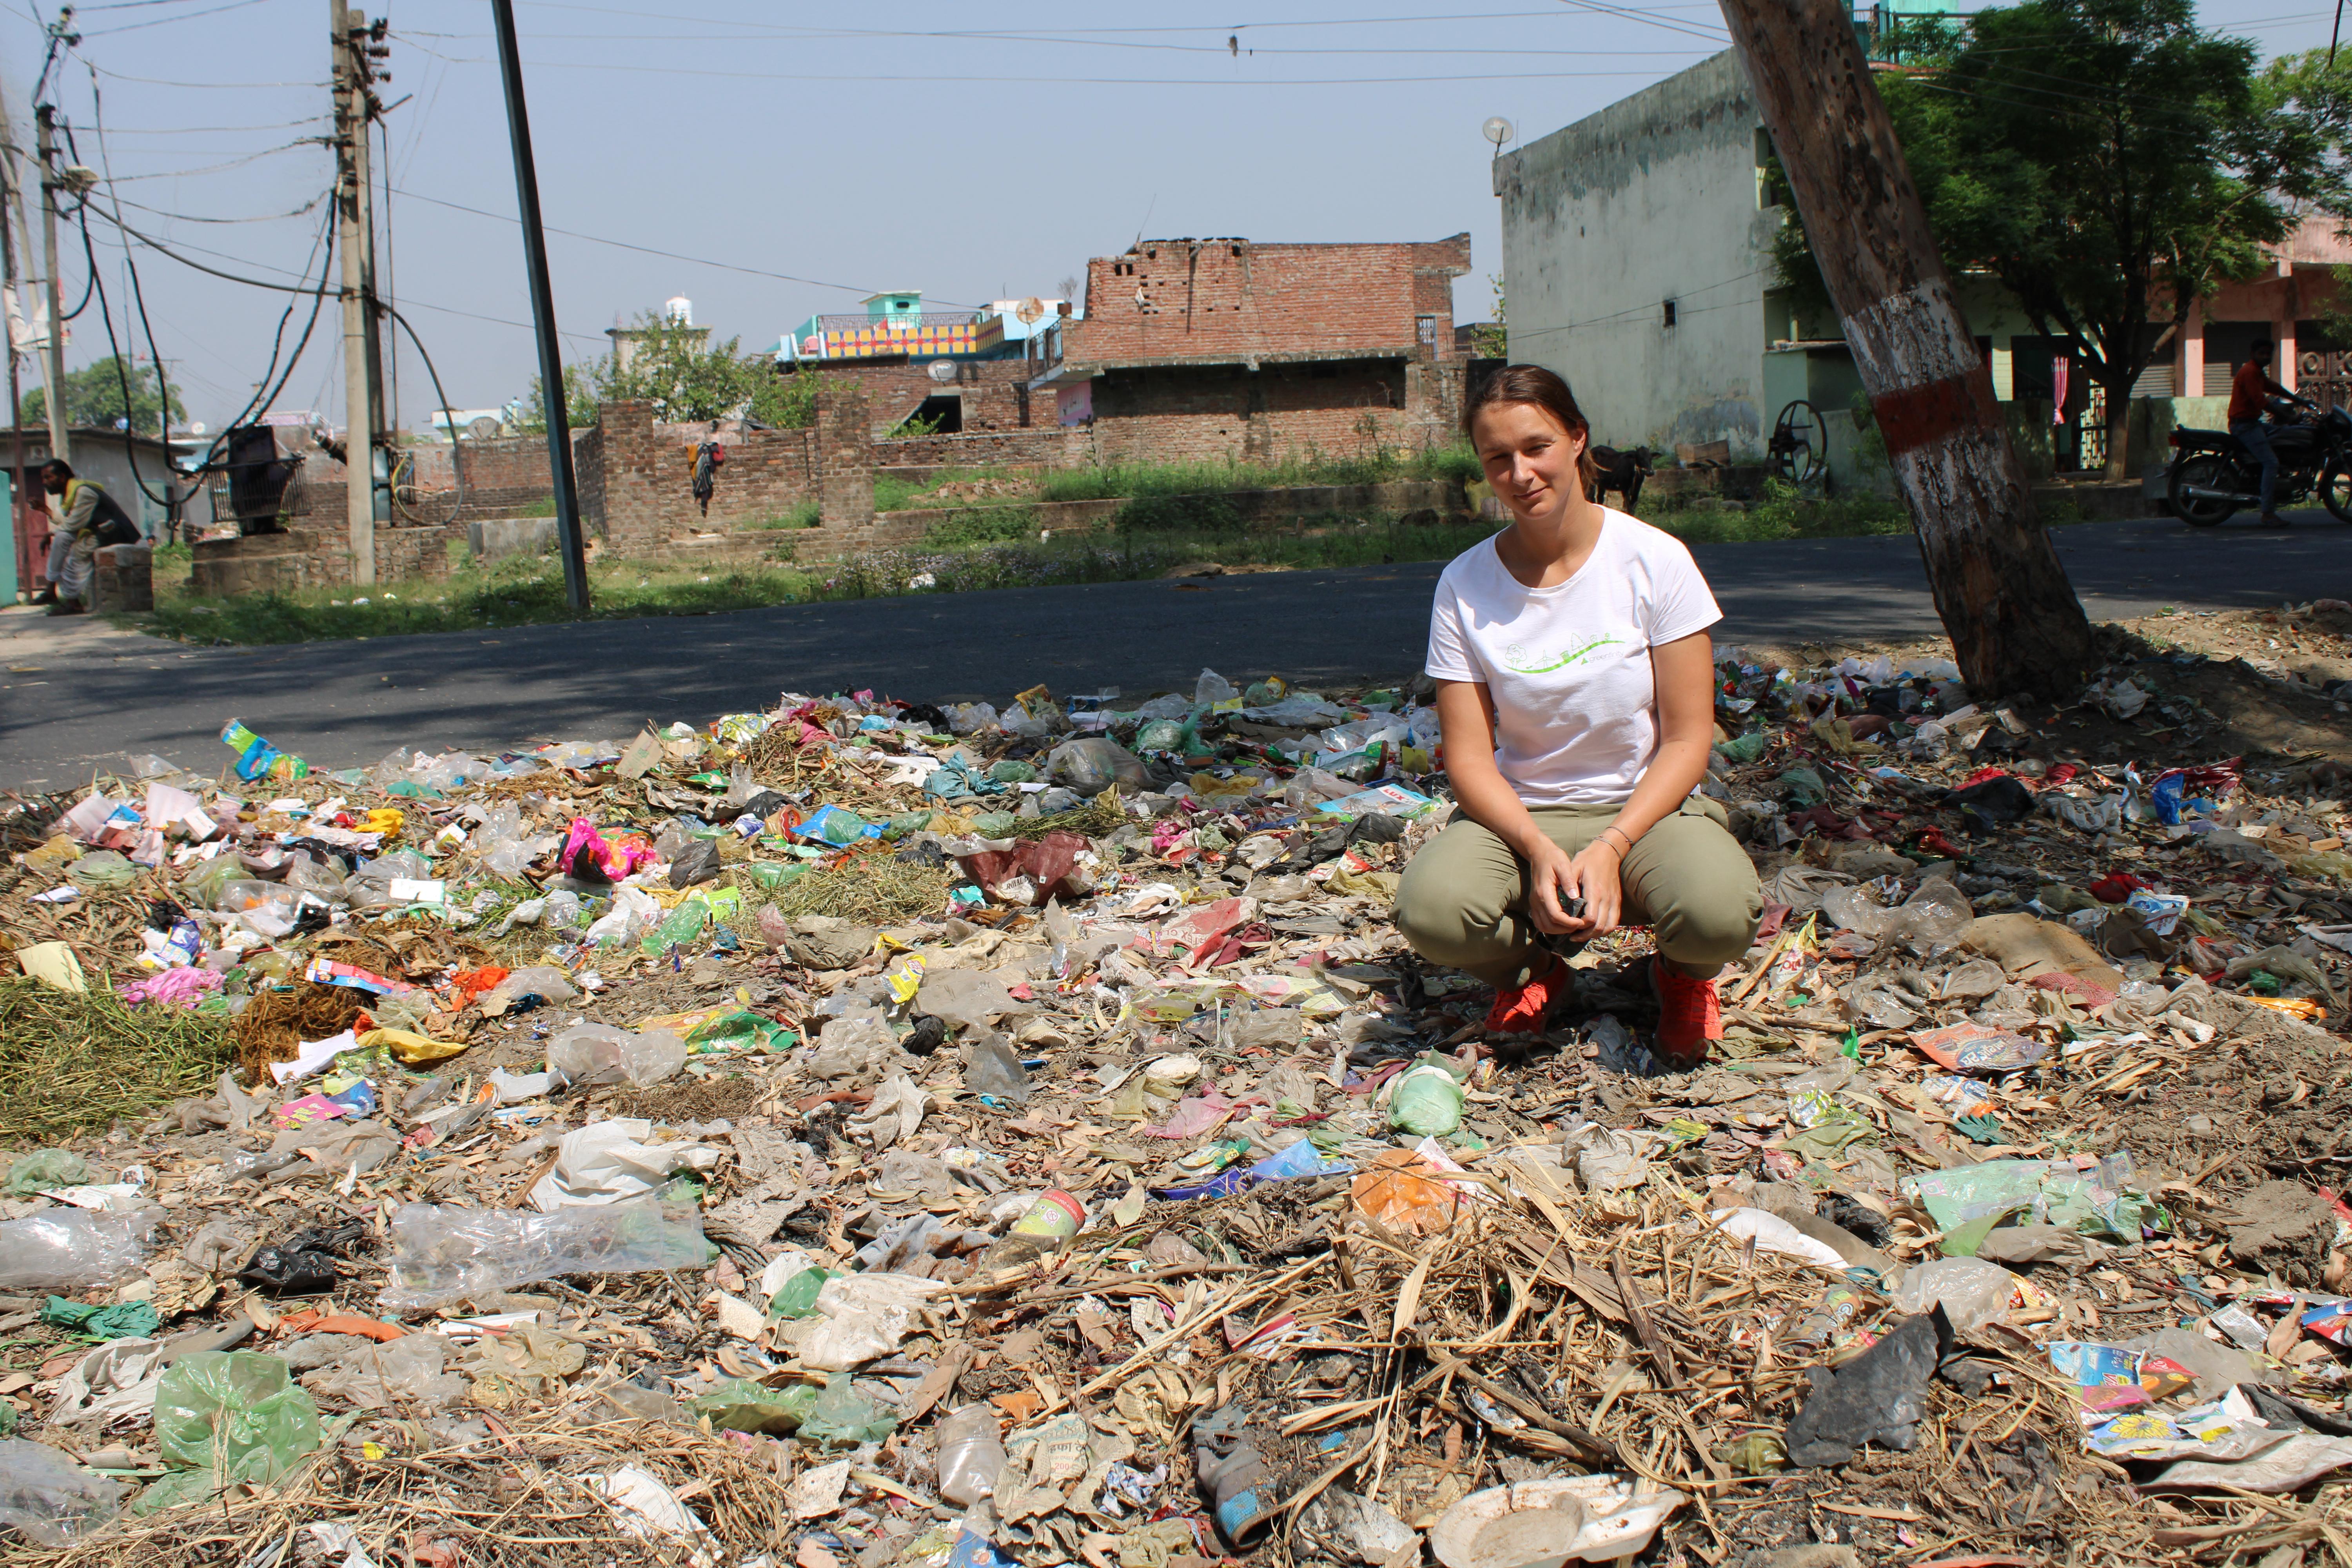 Piles of rubbish in India